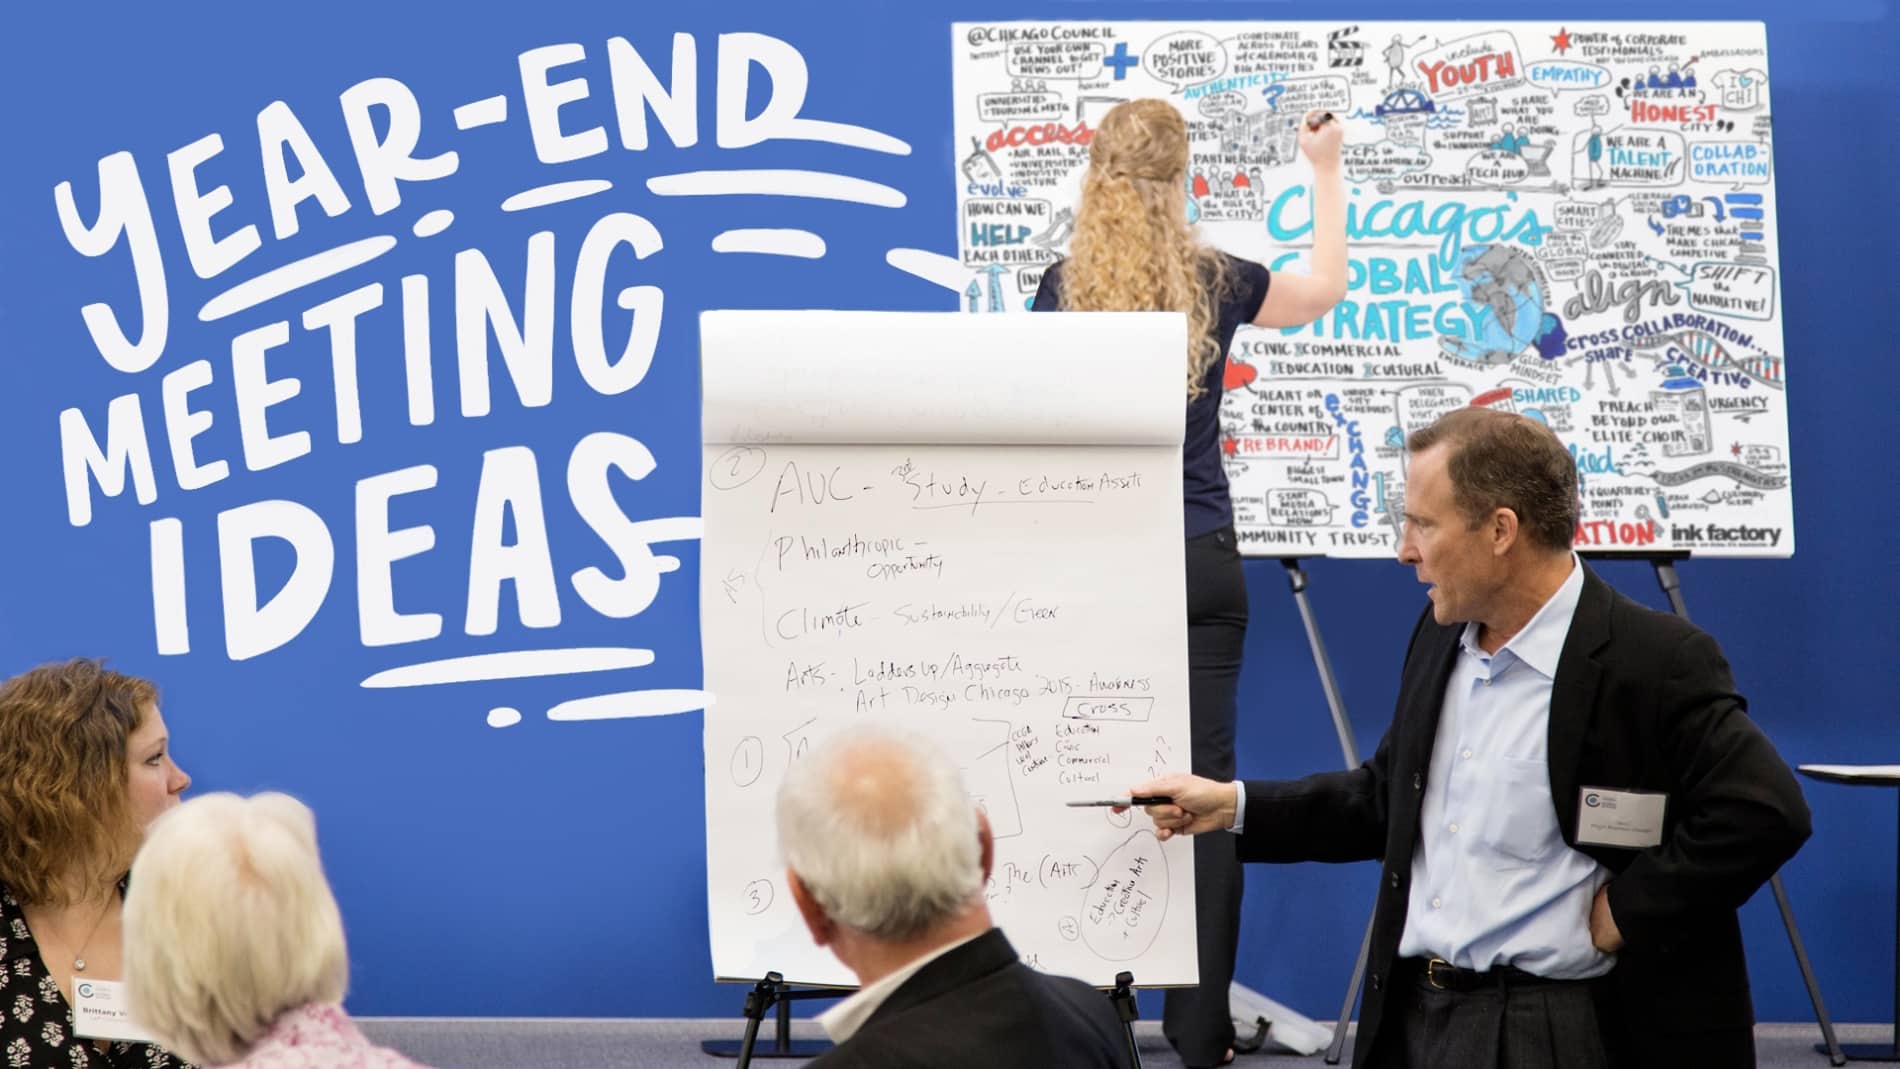 Year End Meeting Ideas: Give Them A Creative Boost With Visual Notes